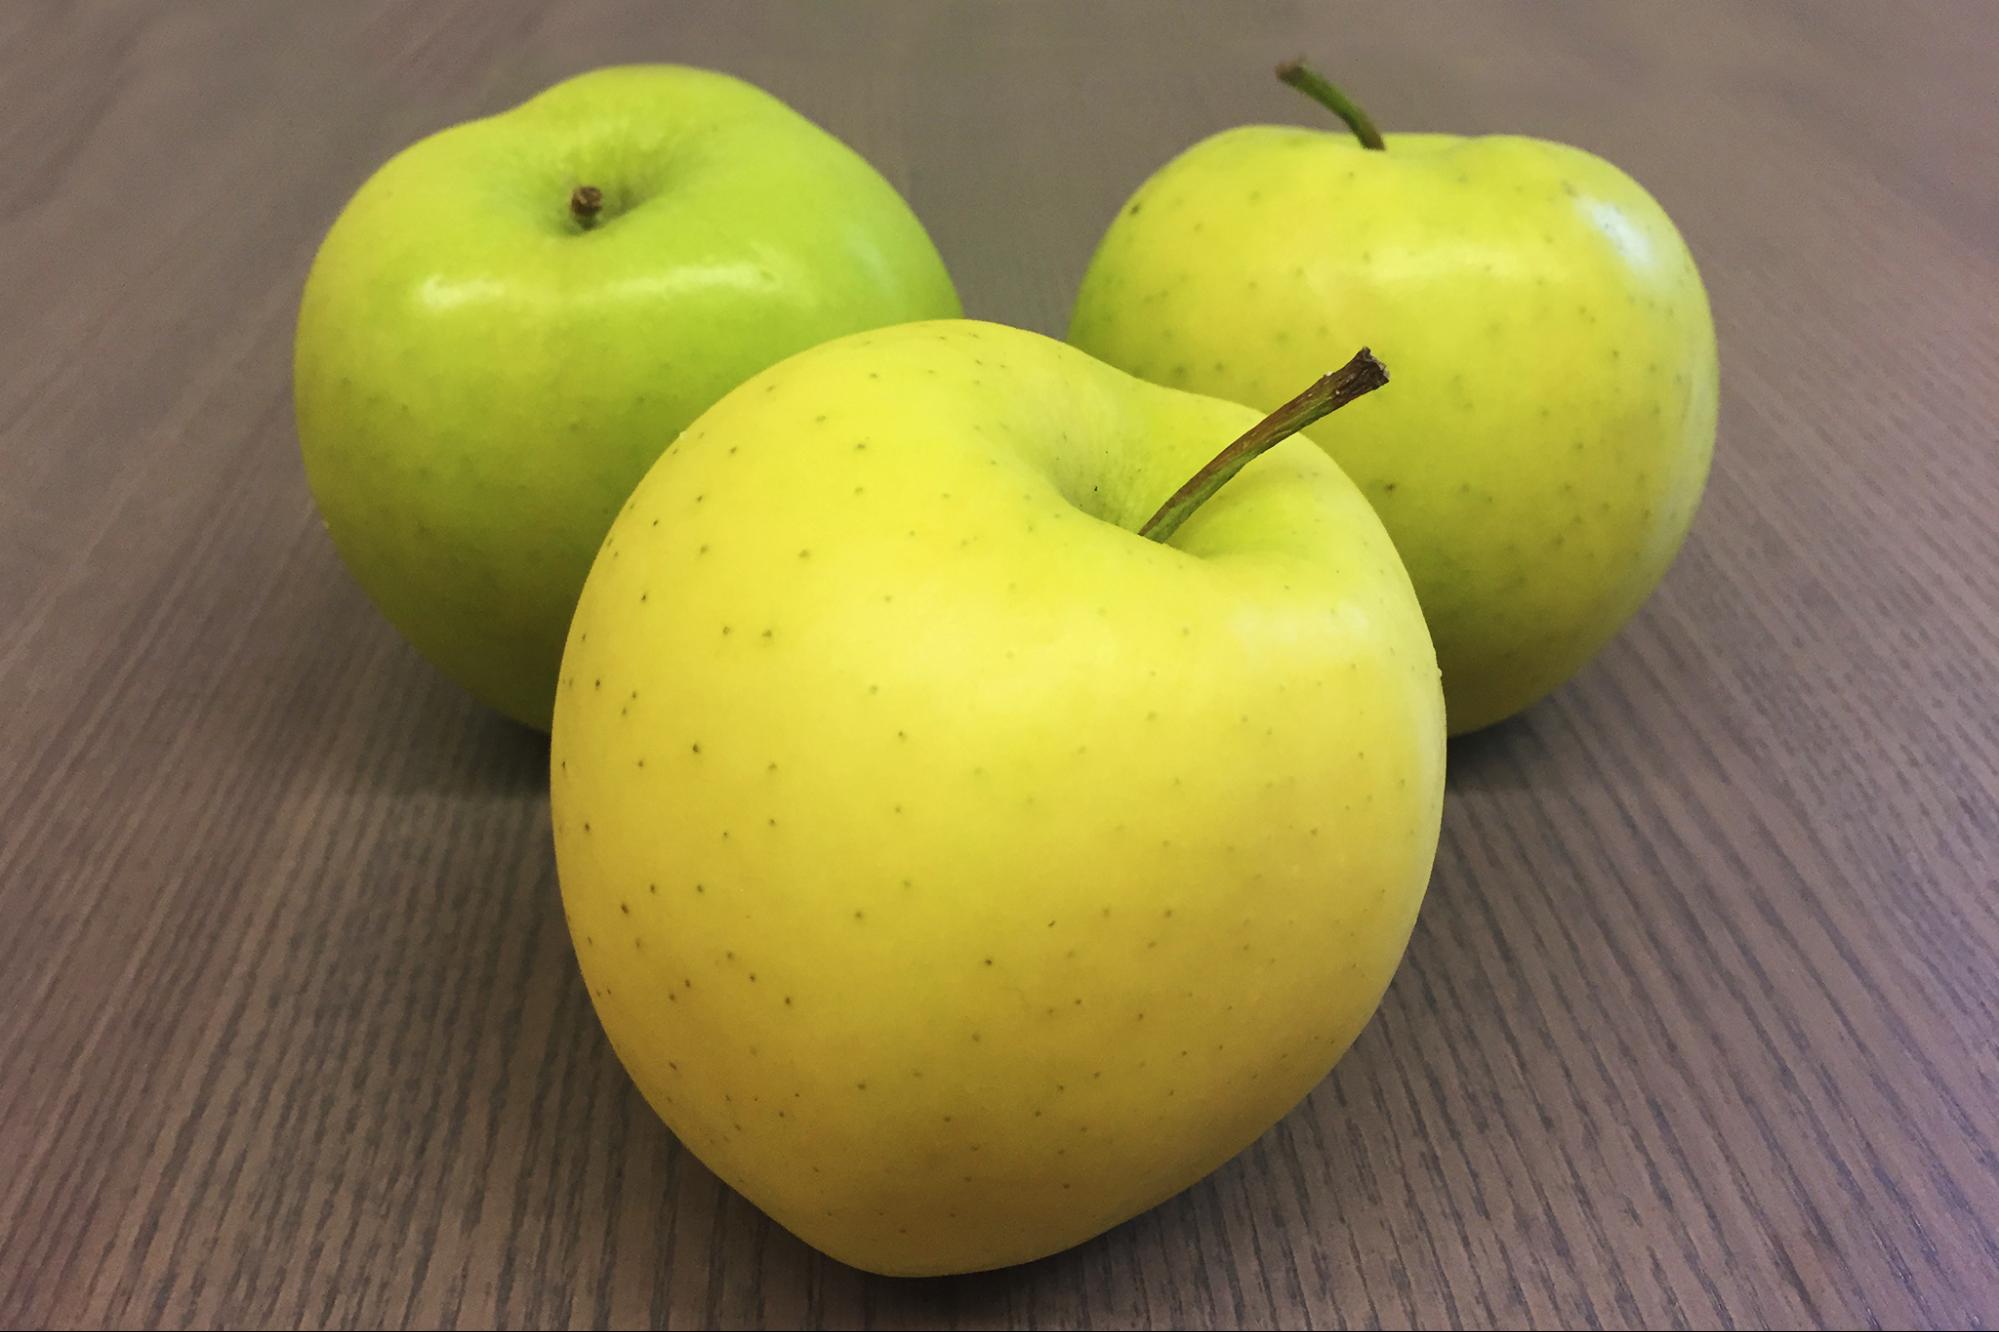 Yellow / Golden Delicious is a popular type of yellow apples